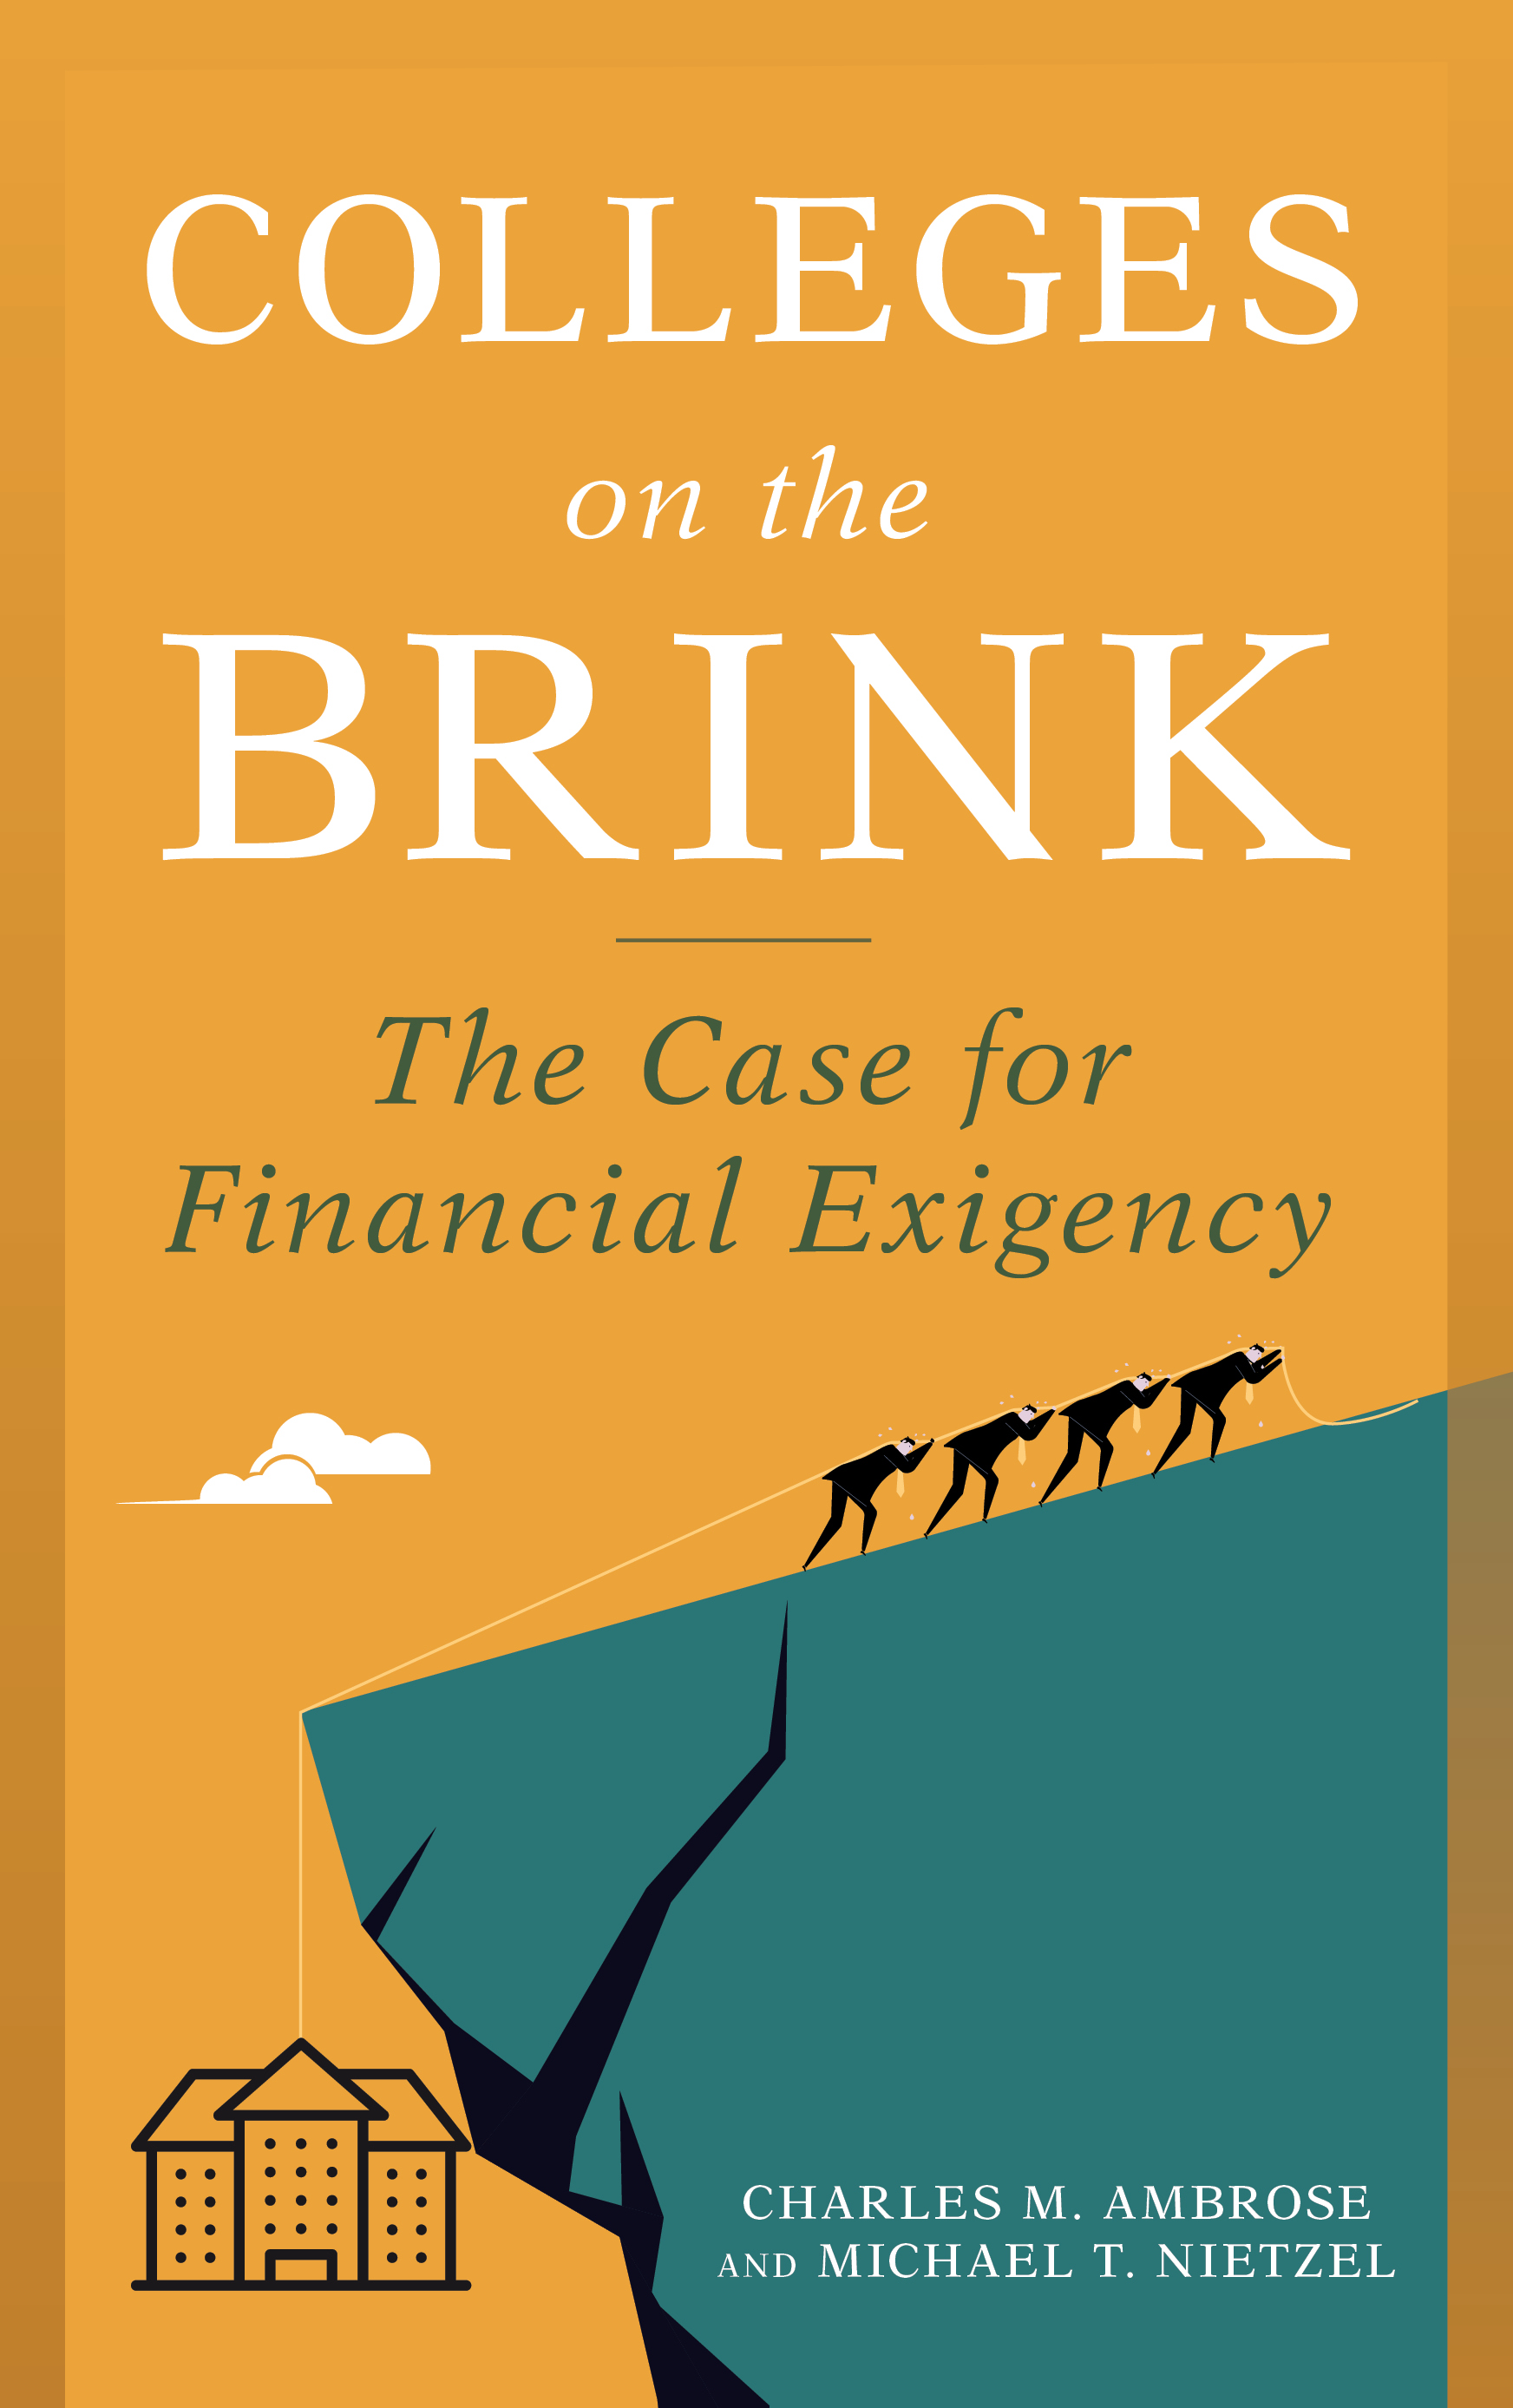 Colleges on the Brink: The Case for Financial Exigency